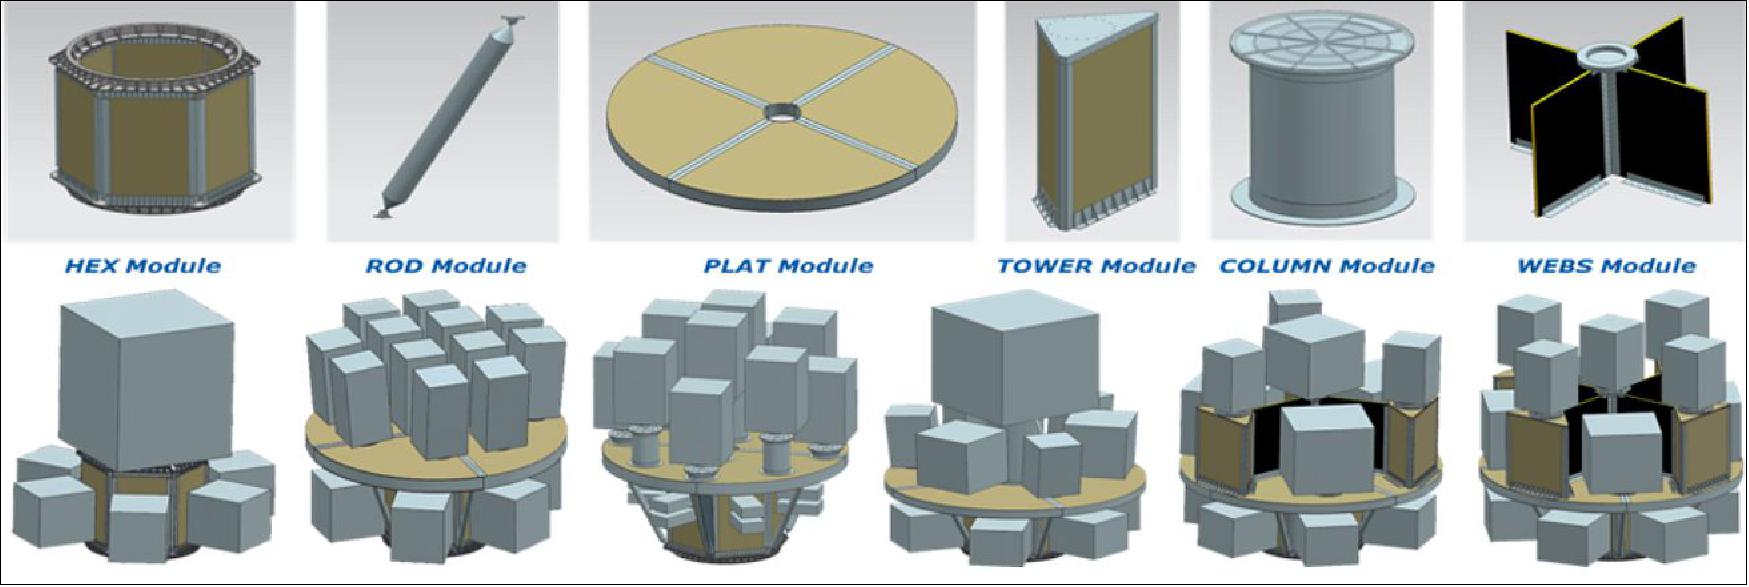 Figure 16: SSMS modular parts. The SSMS dispenser has been designed to be as market-responsive as possible, able to accommodate any combination of customers, from a main large satellite with smaller companions as piggy back to multiple smaller satellites, or dozens of individual CubeSats. Basically the SSMS is composed of different modular parts, which can be put together as needed, Lego-style: a central column, tower or hexagon, a supporting platform, adjustable rods and dividers (image credit: ESA)